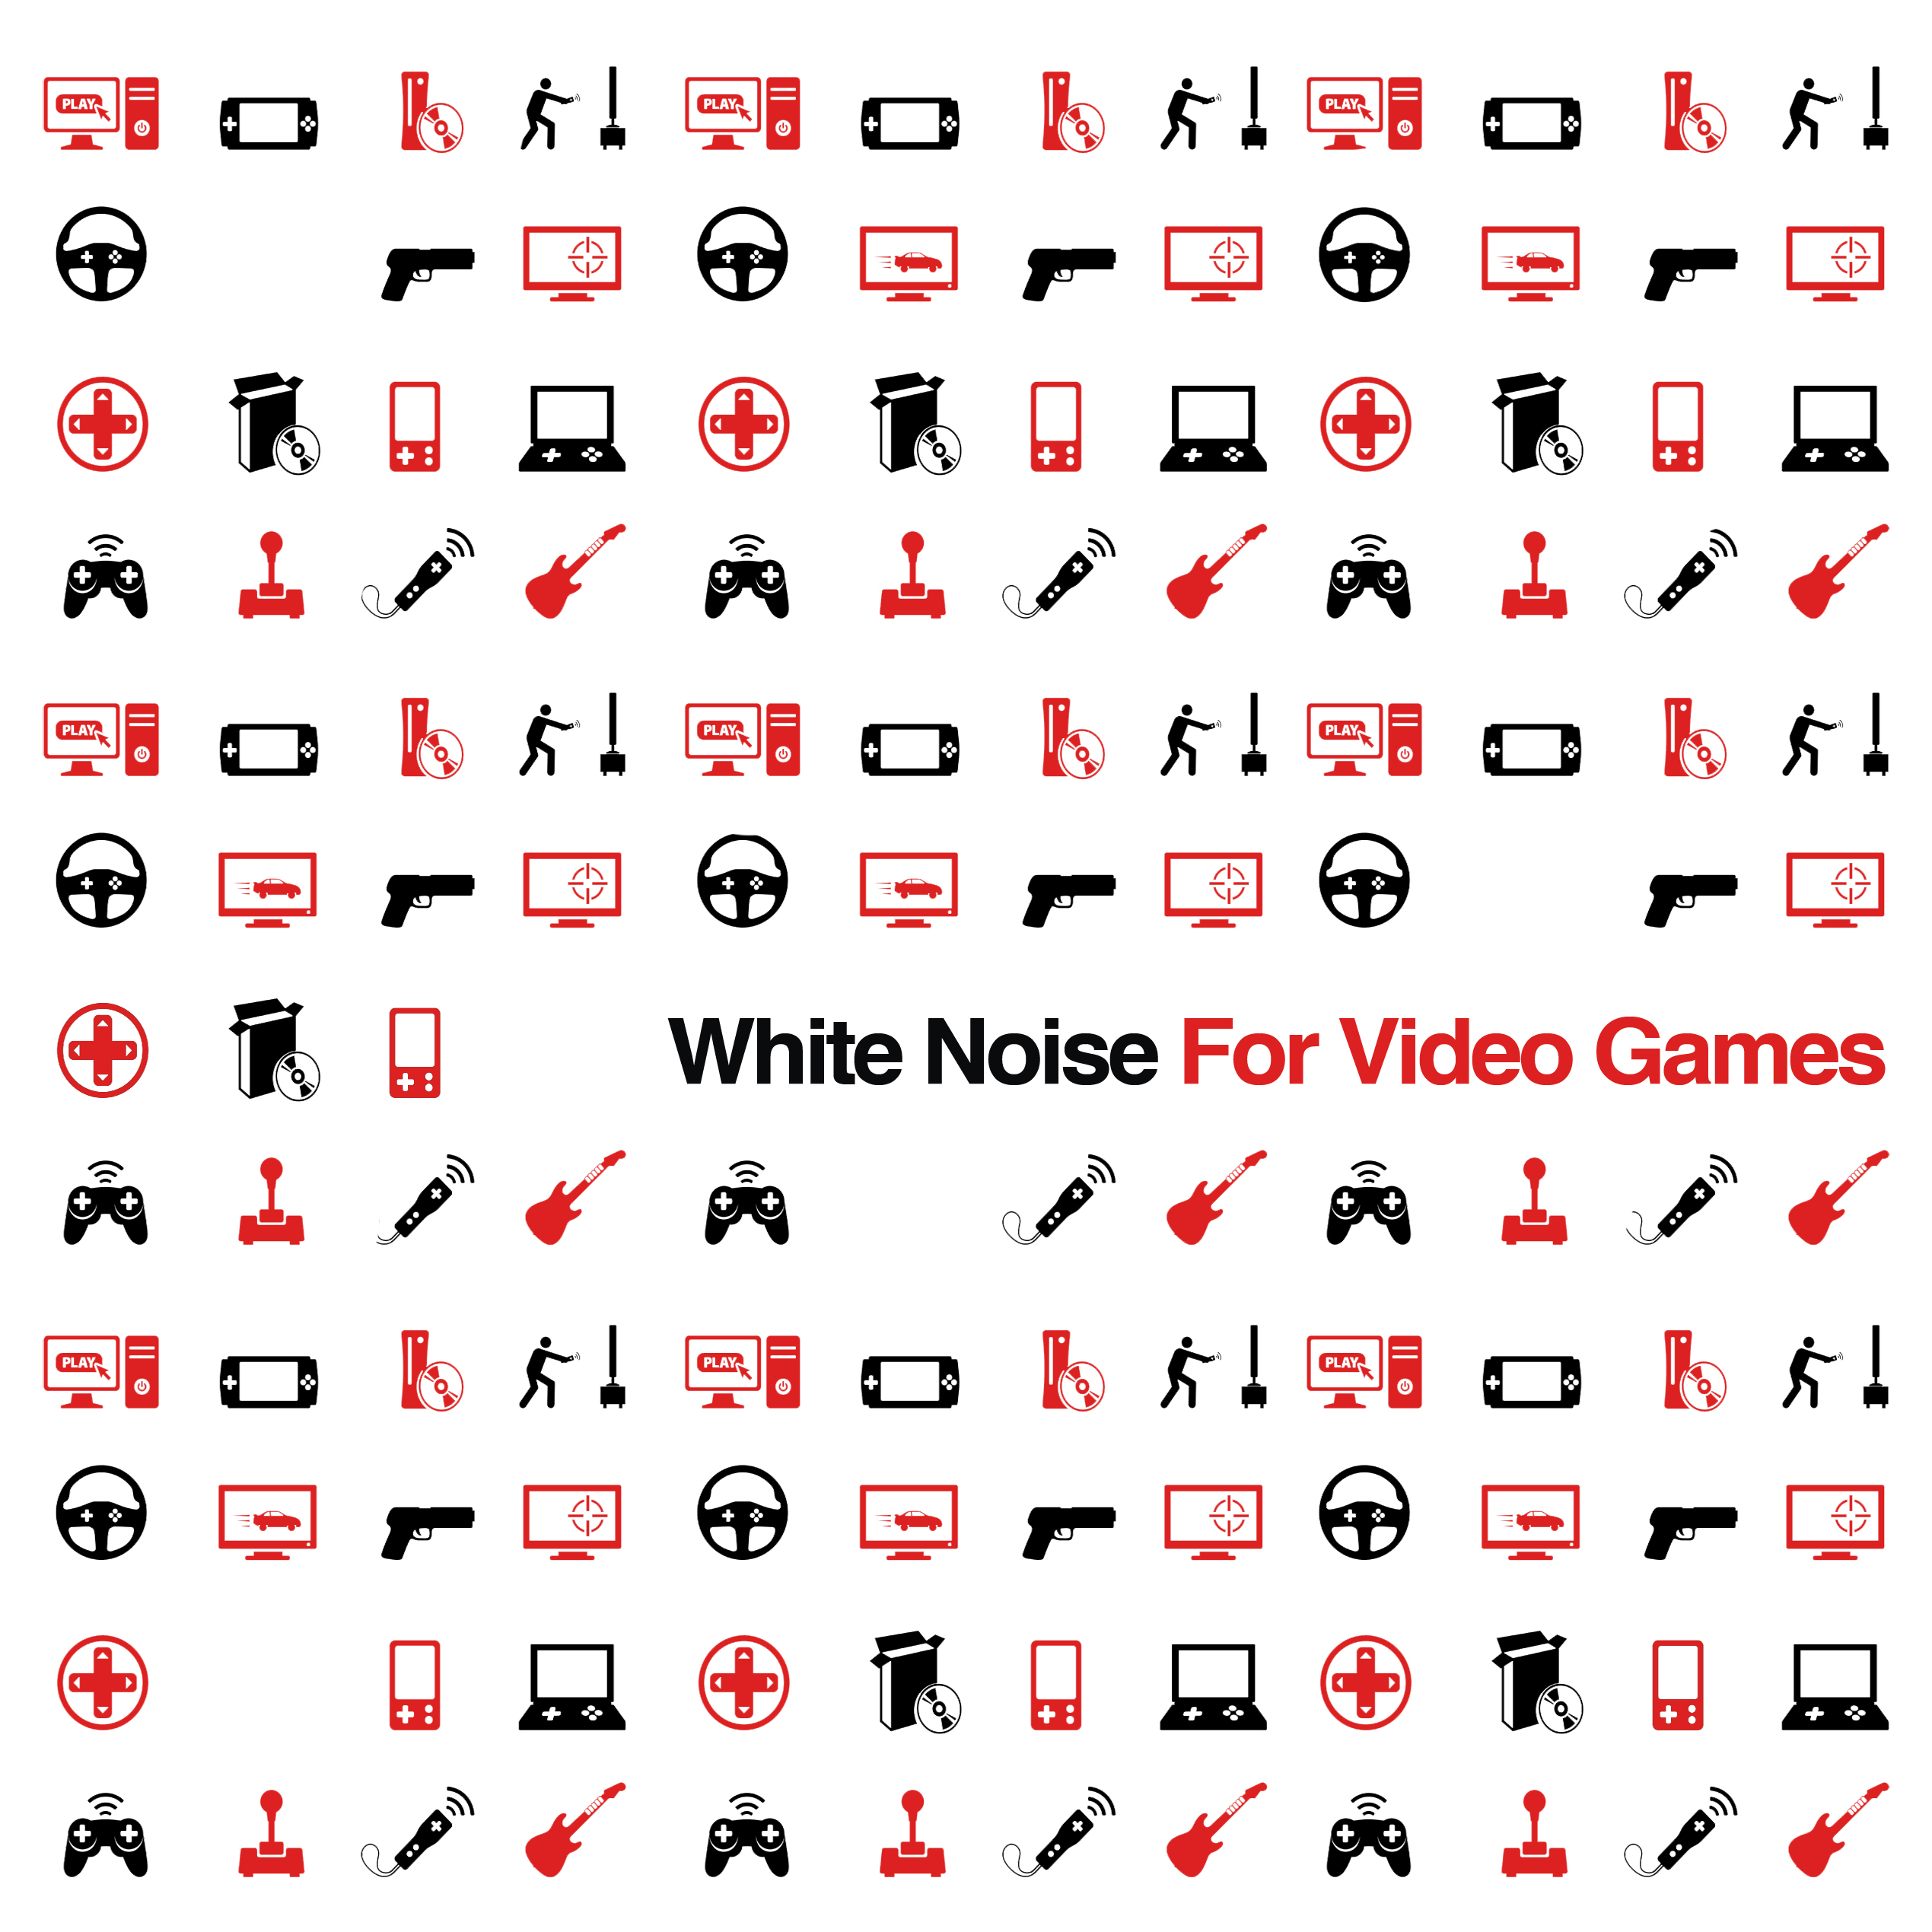 White Noise for Video Games: Help Improve Your Console Playing Concentration With Sound Masking Tracks for Any Gamer